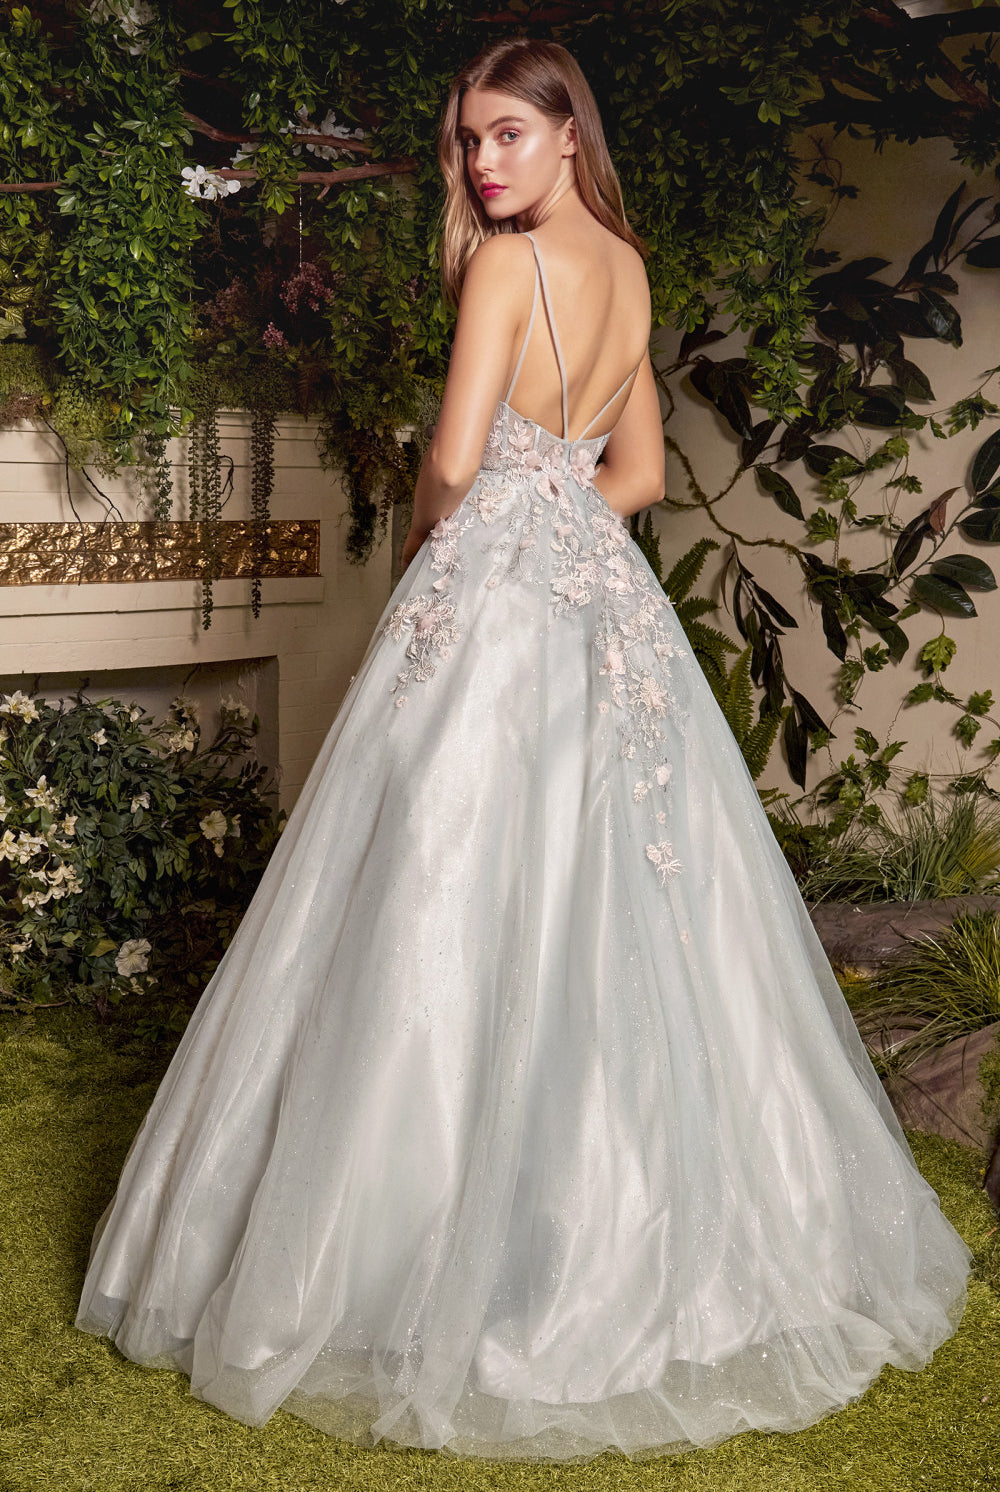 Tiana Blossom Gown: Floral Bodice, Backless, Structured Corset, A-line Layered Skirt-smcdress